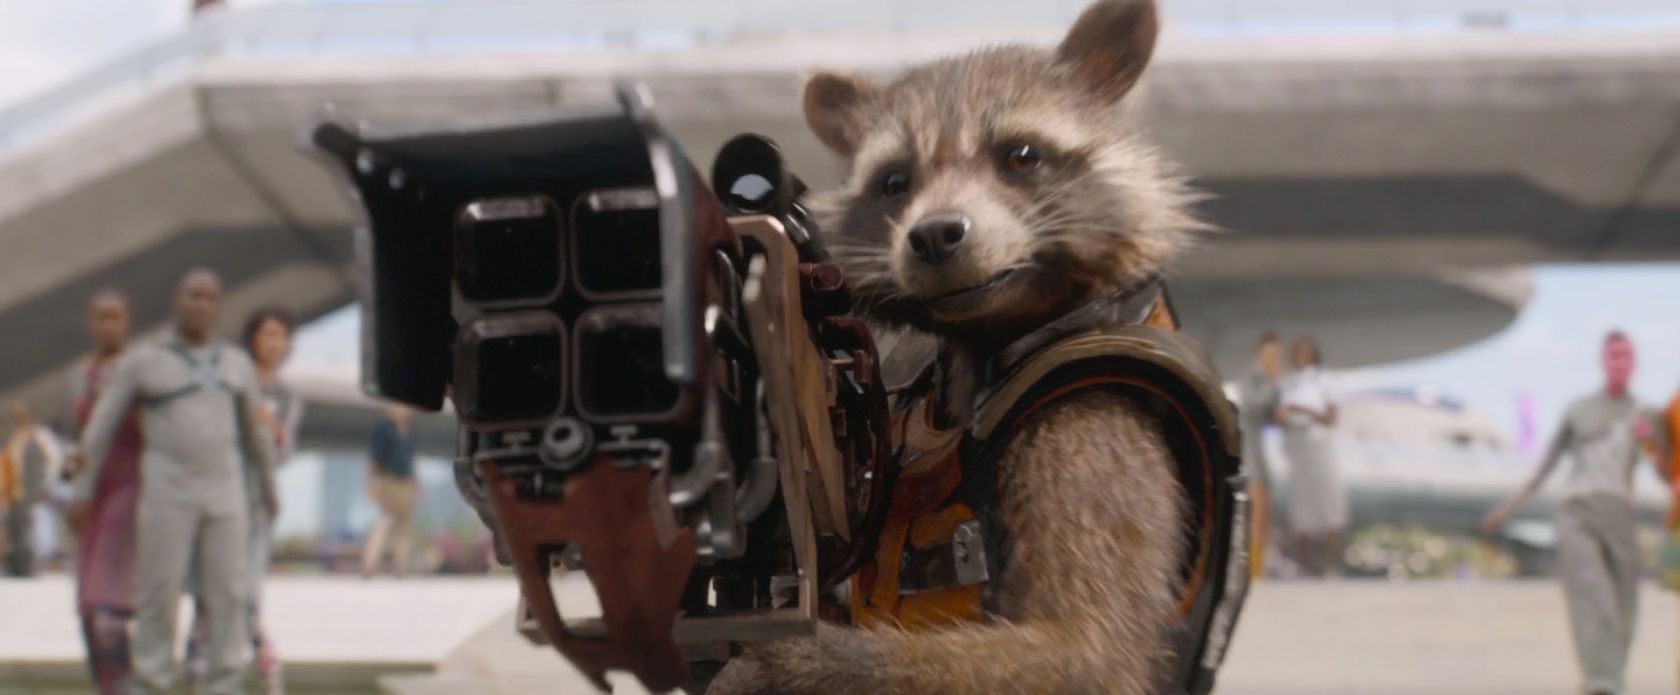 Image result for rocket raccoon guardians of the galaxy